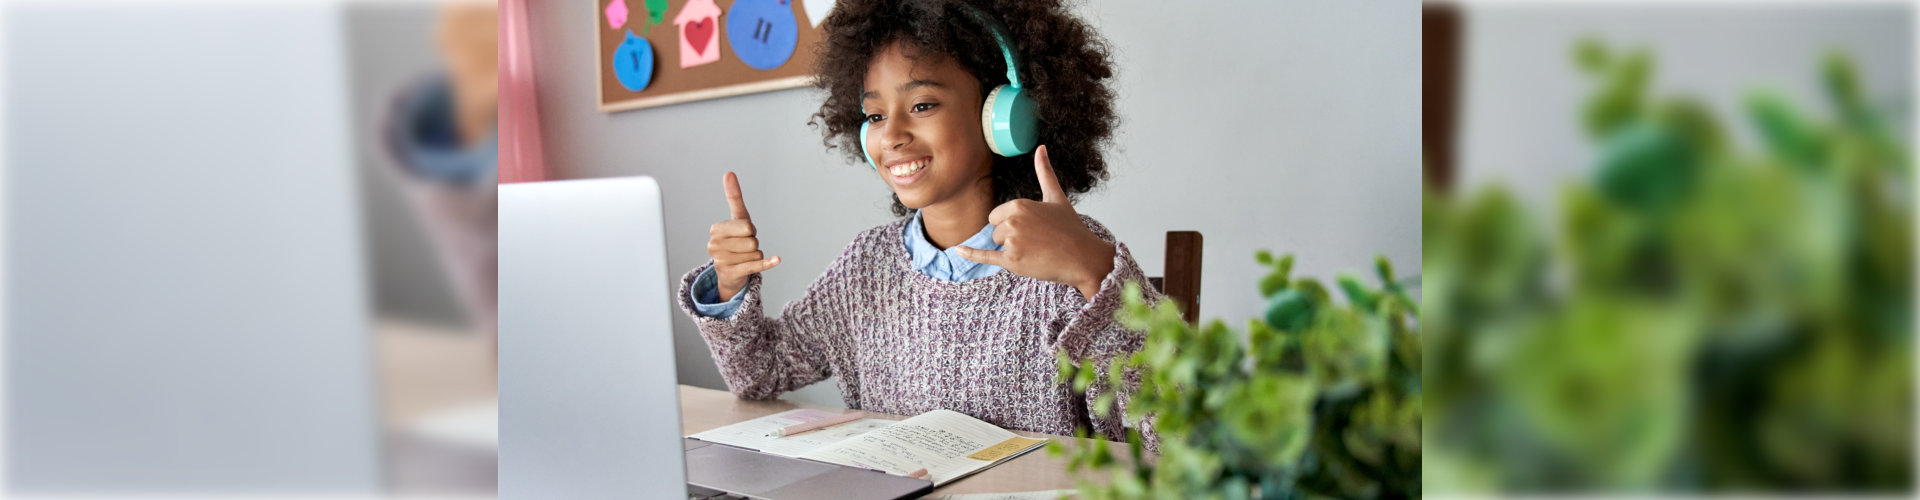 girl looking at laptop with headphones smiling